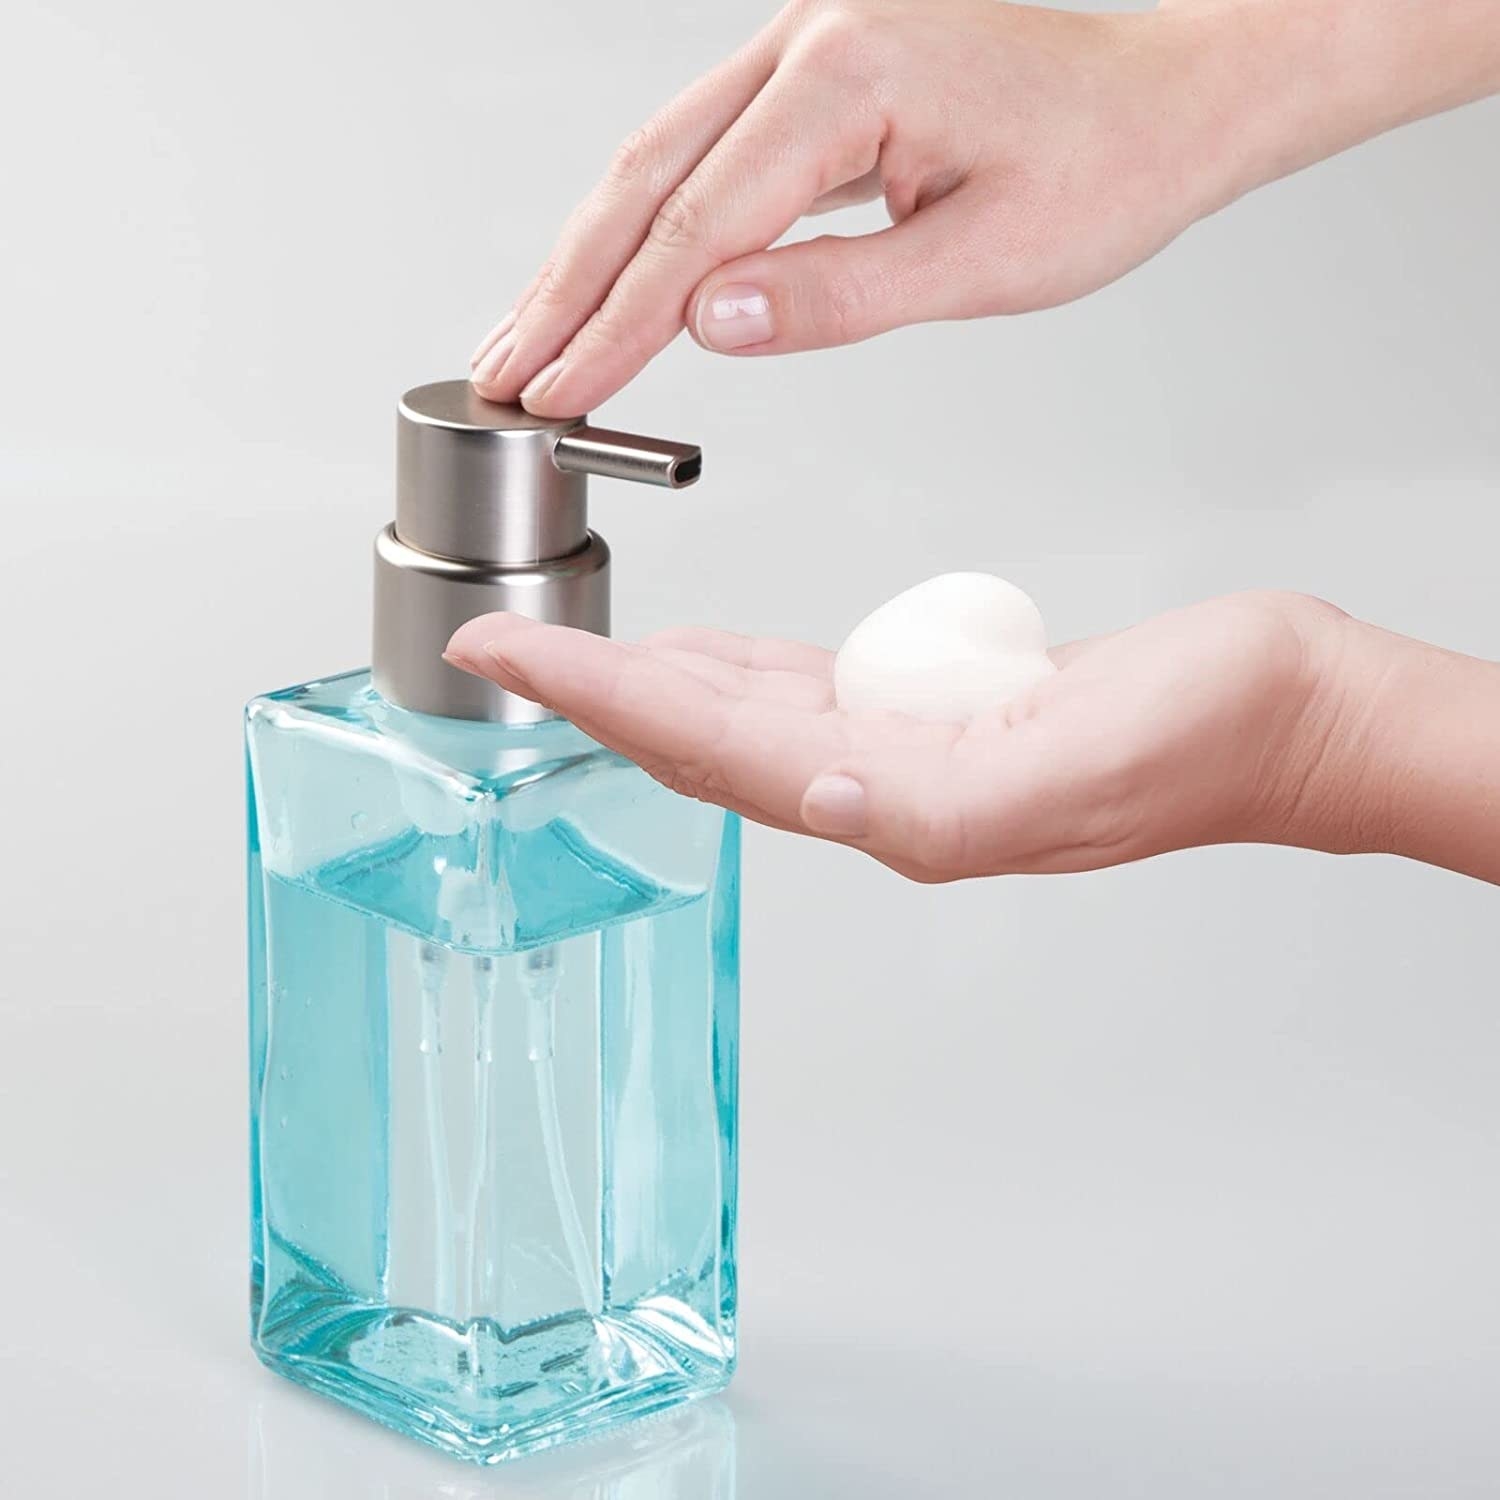 Model using the light blue soap dispenser with clear blue soap to dispense some foam onto their hand